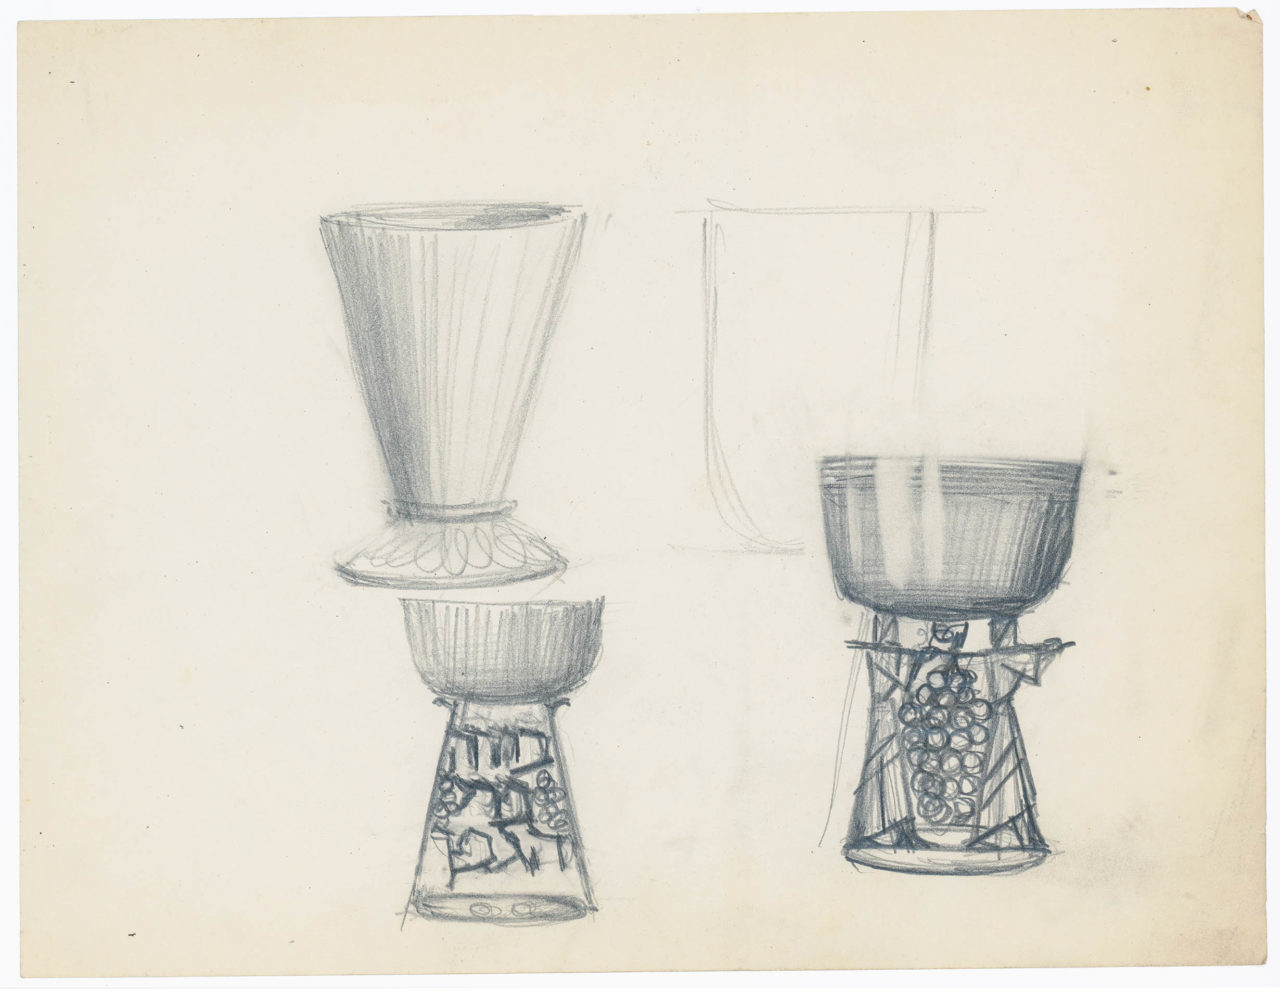 Sketches for a kiddush cup